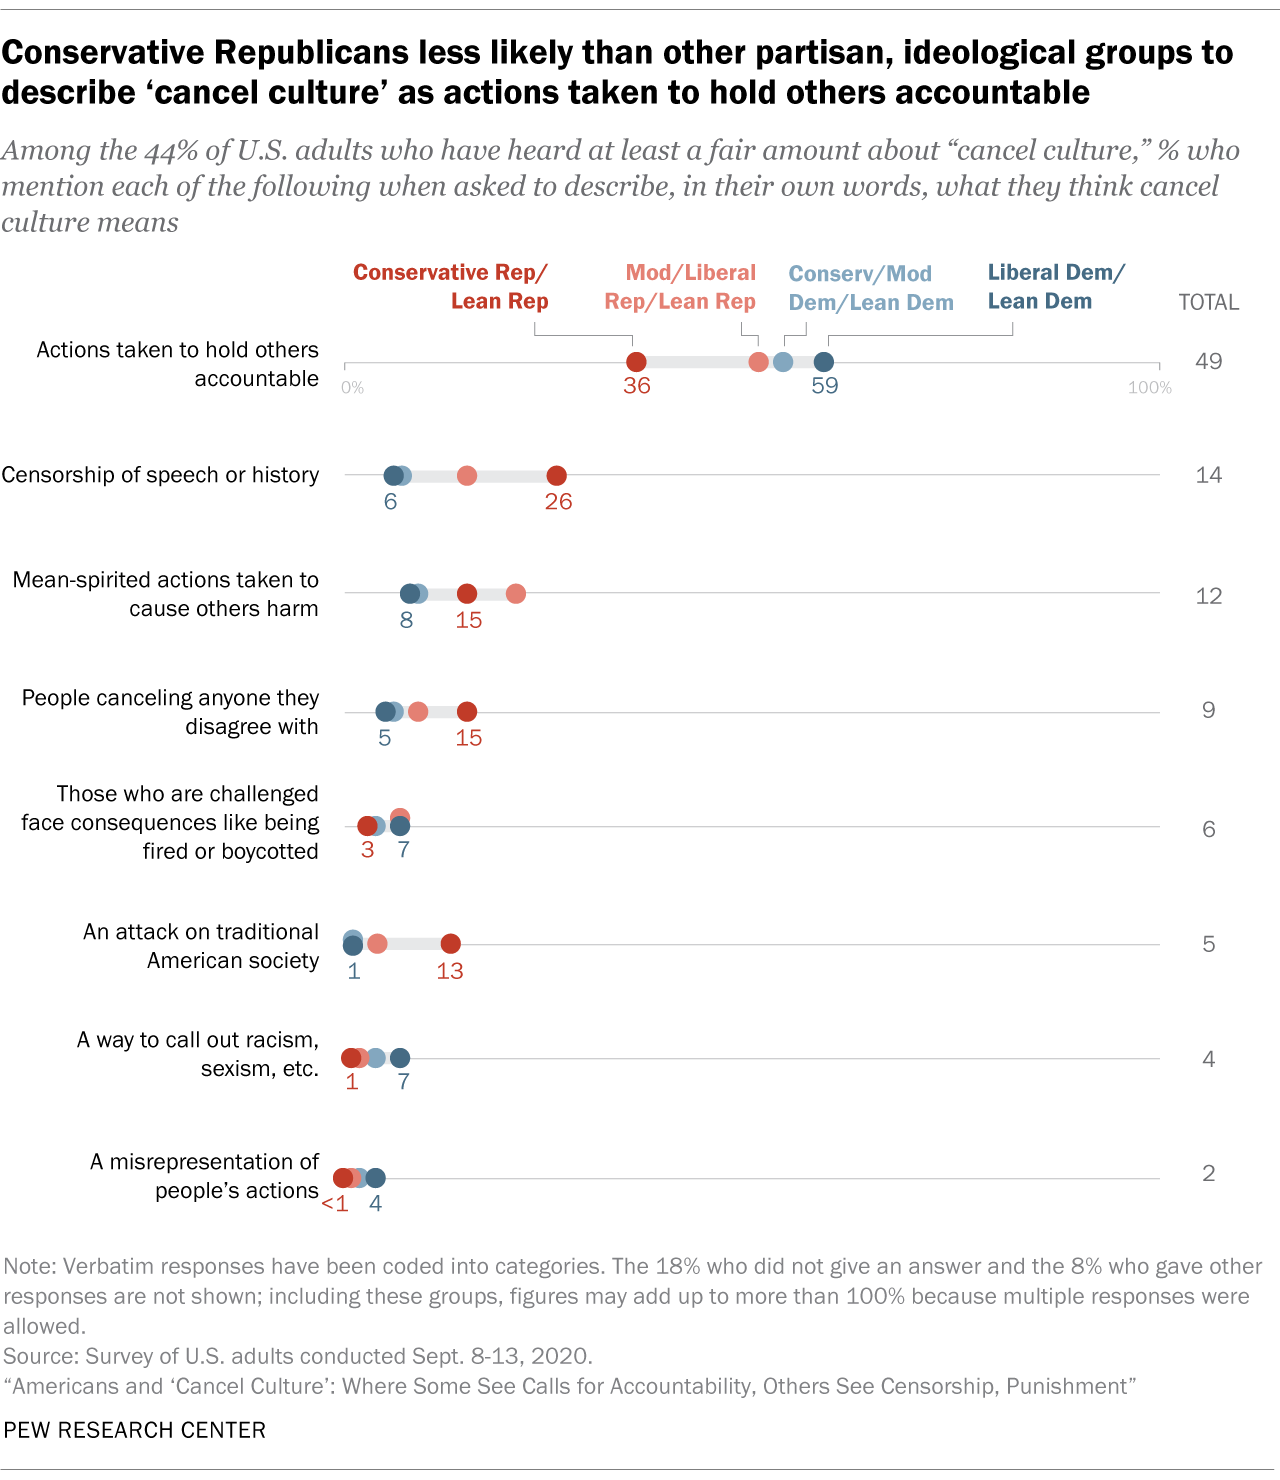 Conservative Republicans less likely than other partisan, ideological groups to describe 'cancel culture' as actions taken to hold others accountable